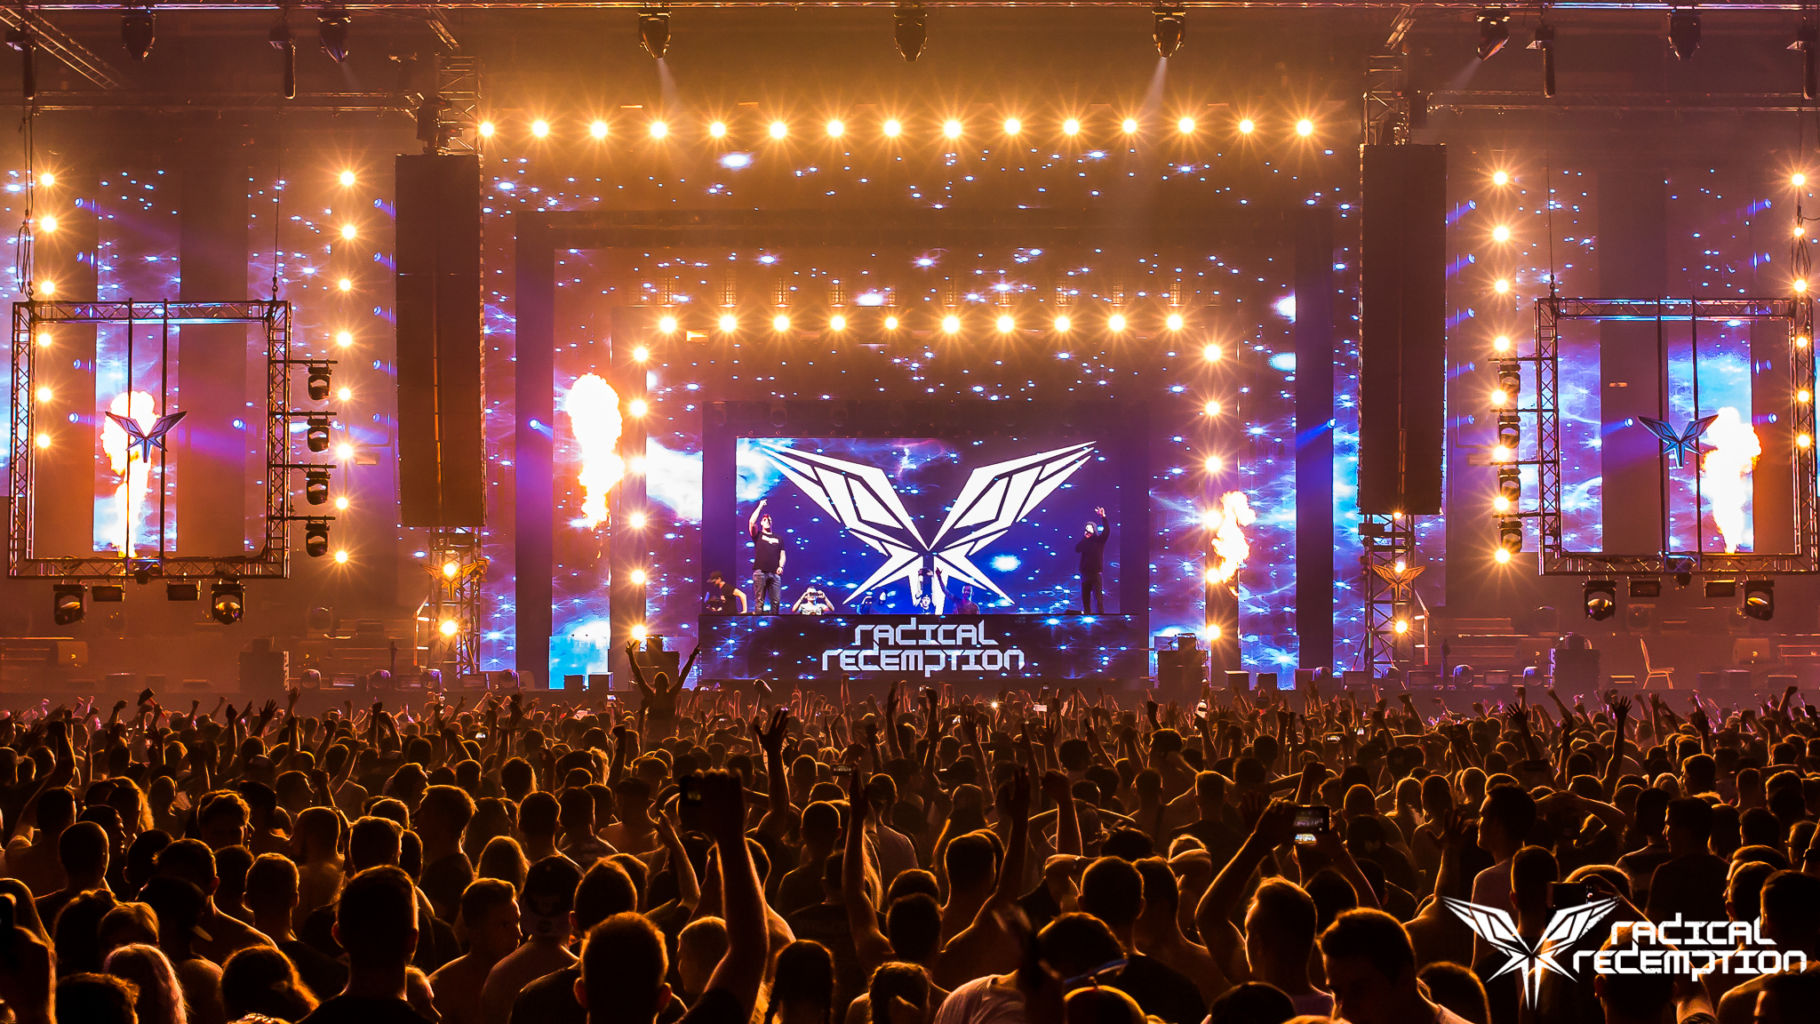 Radical Redemption 2018 tickets now available